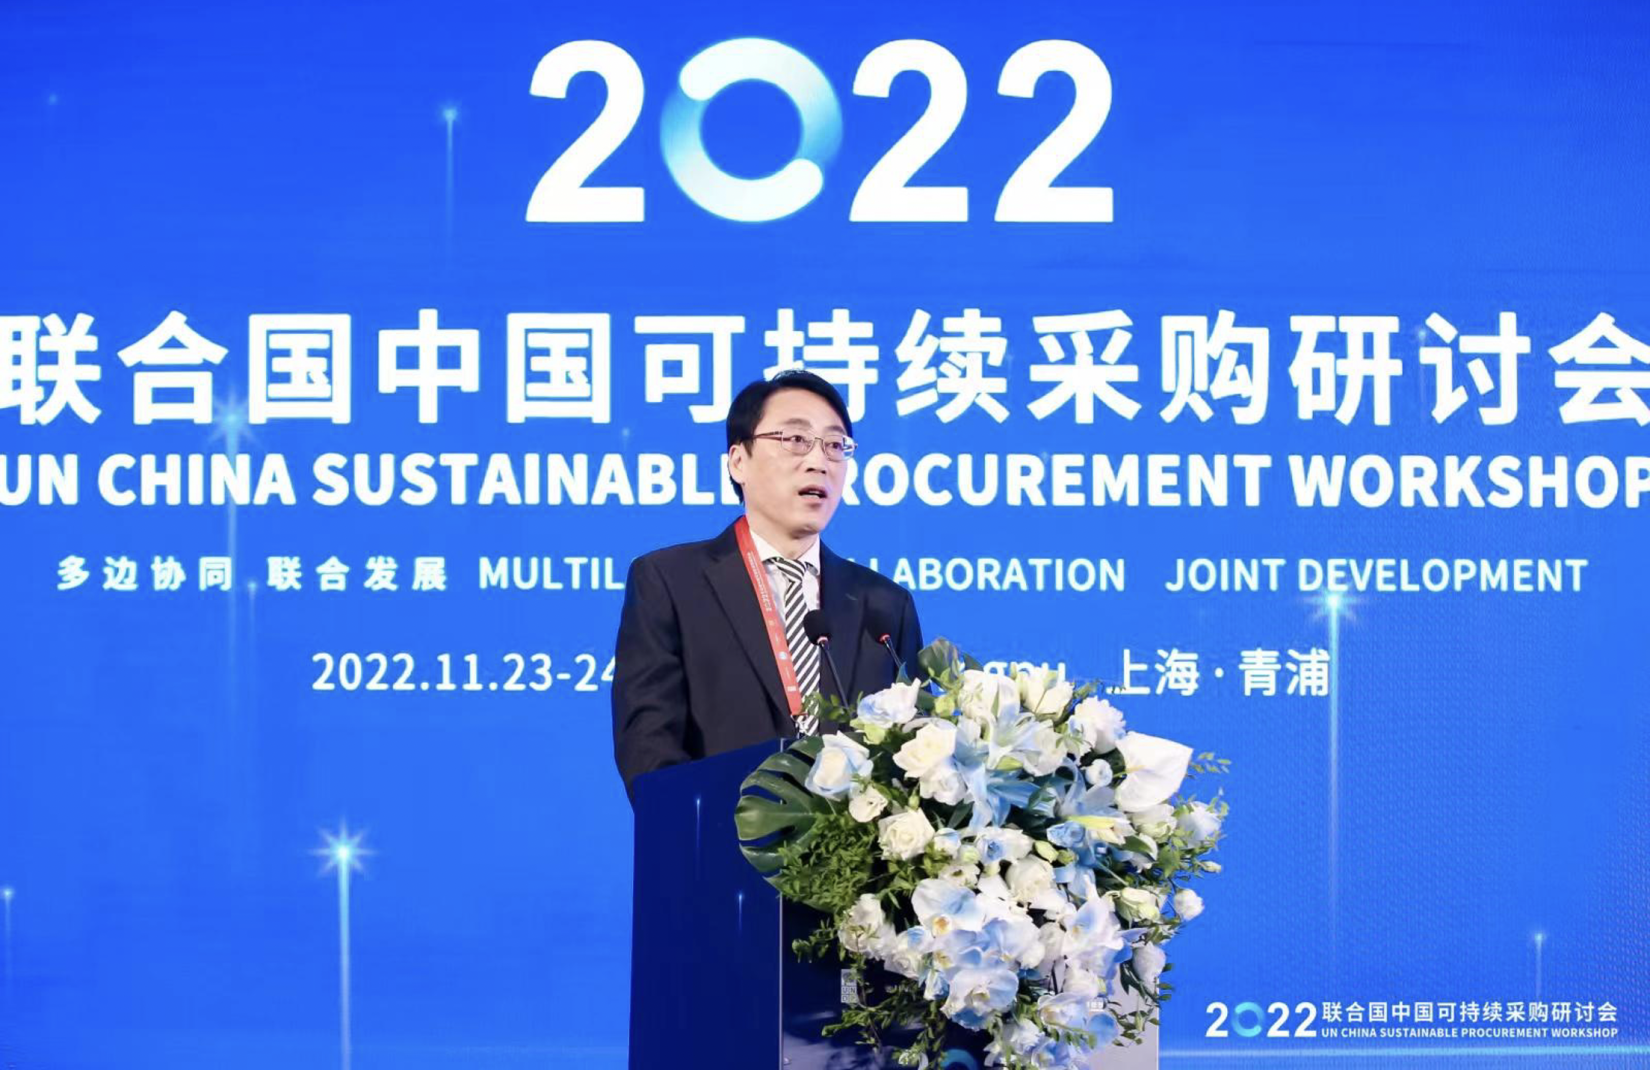 Chen Yu, Deputy Secretary of the Party Committee, Xujing Town, Qingpu District & Director of the UN Procurement Project Office